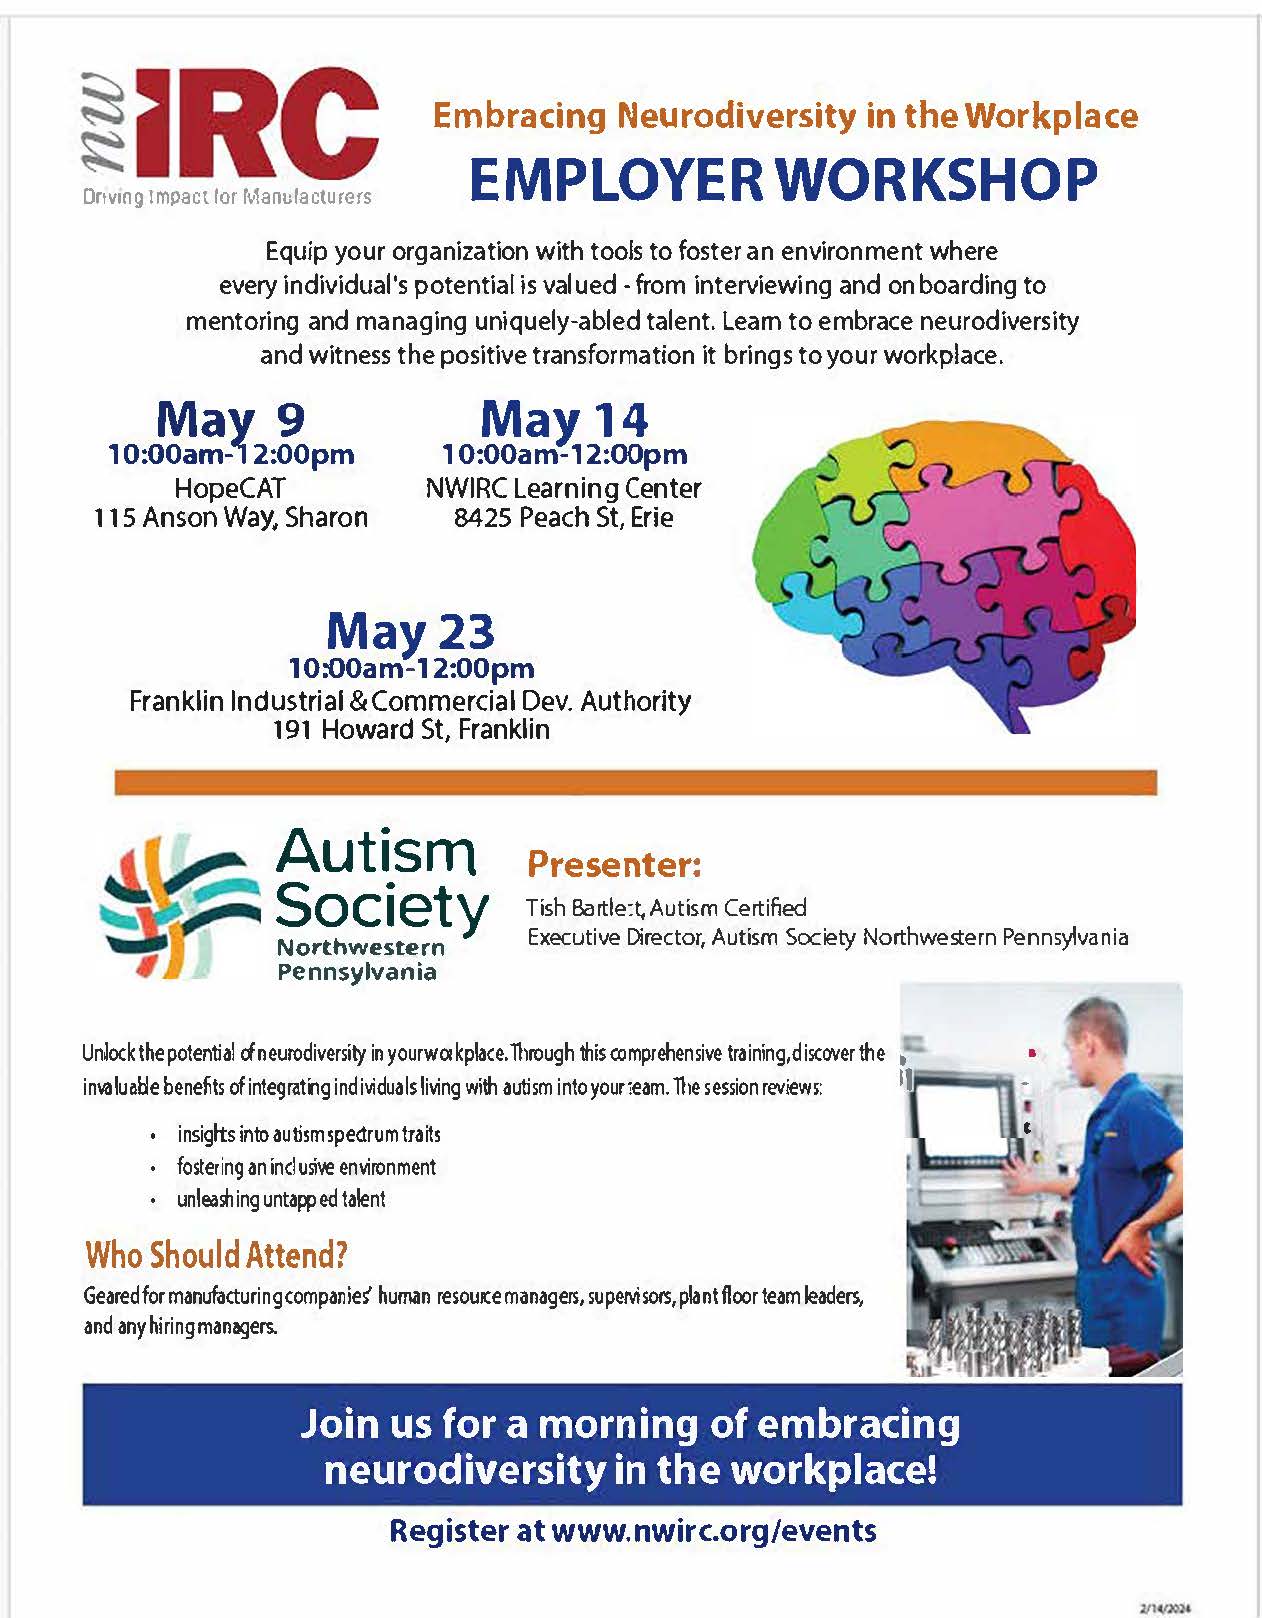 Embracing Neurodiversity in the Workplace Flyer
